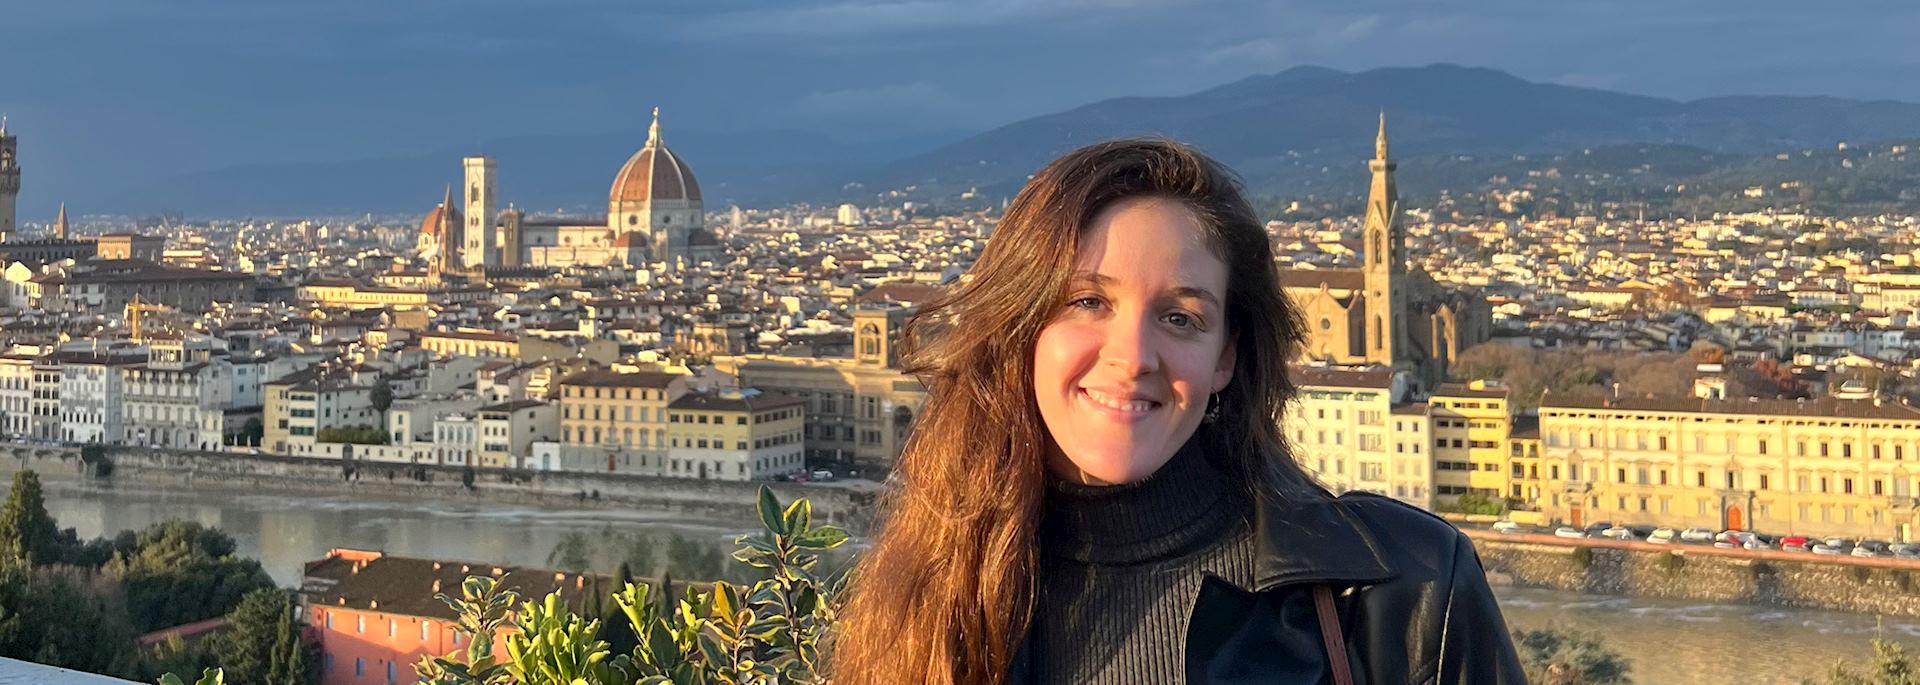 Michaela at Piazzale Michelangelo, Florence, Italy